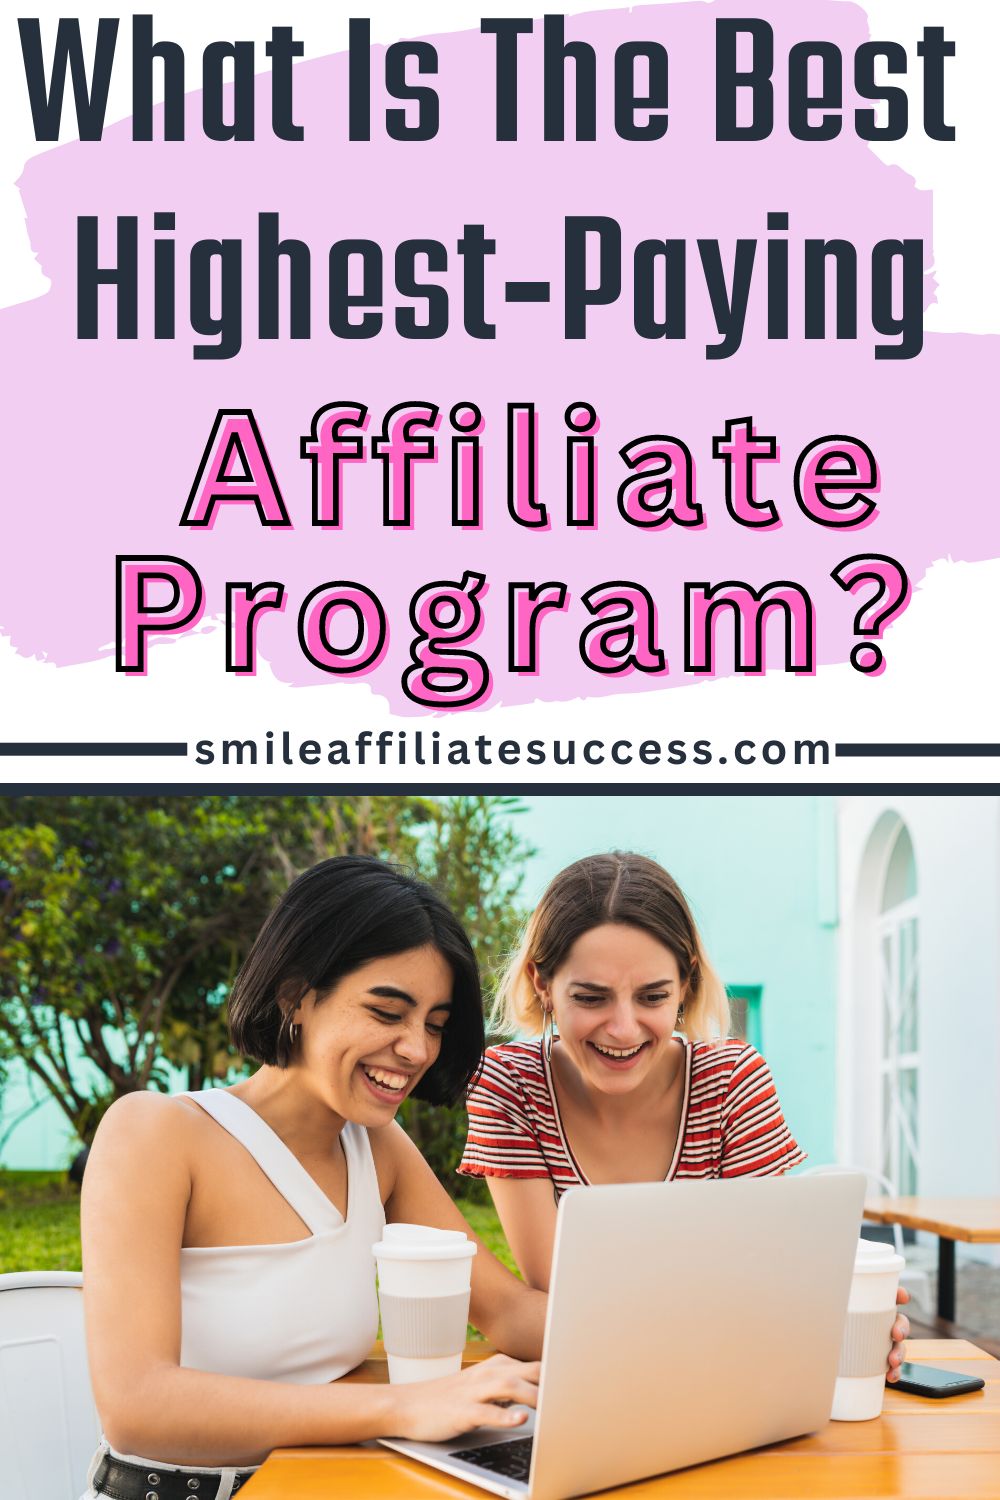 What Is The Best And Highest-Paying Affiliate Program?